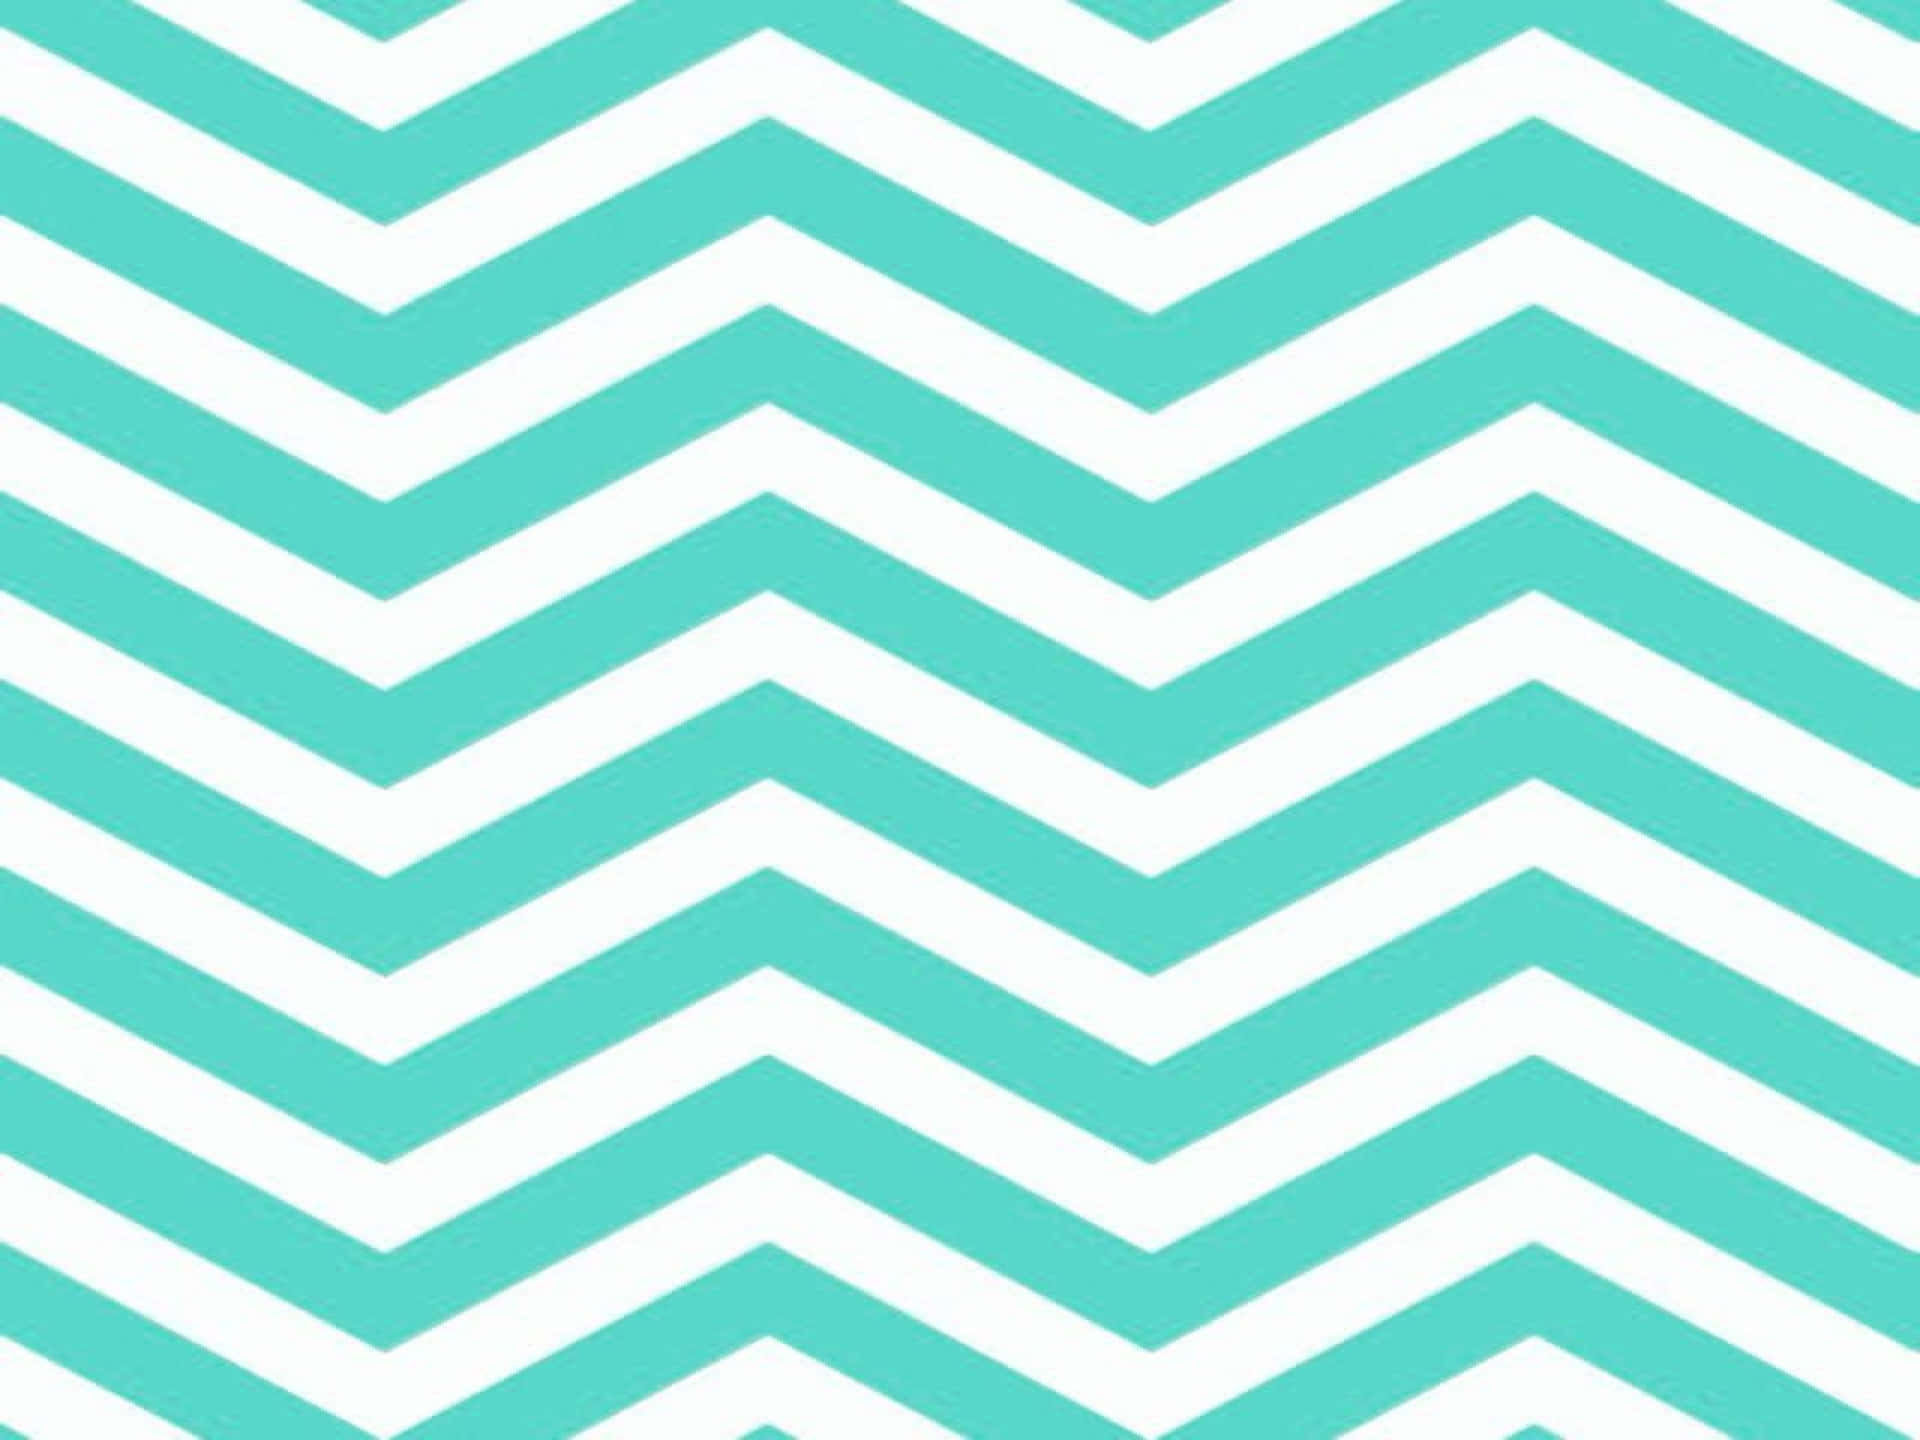 A vibrantly clear turquoise background